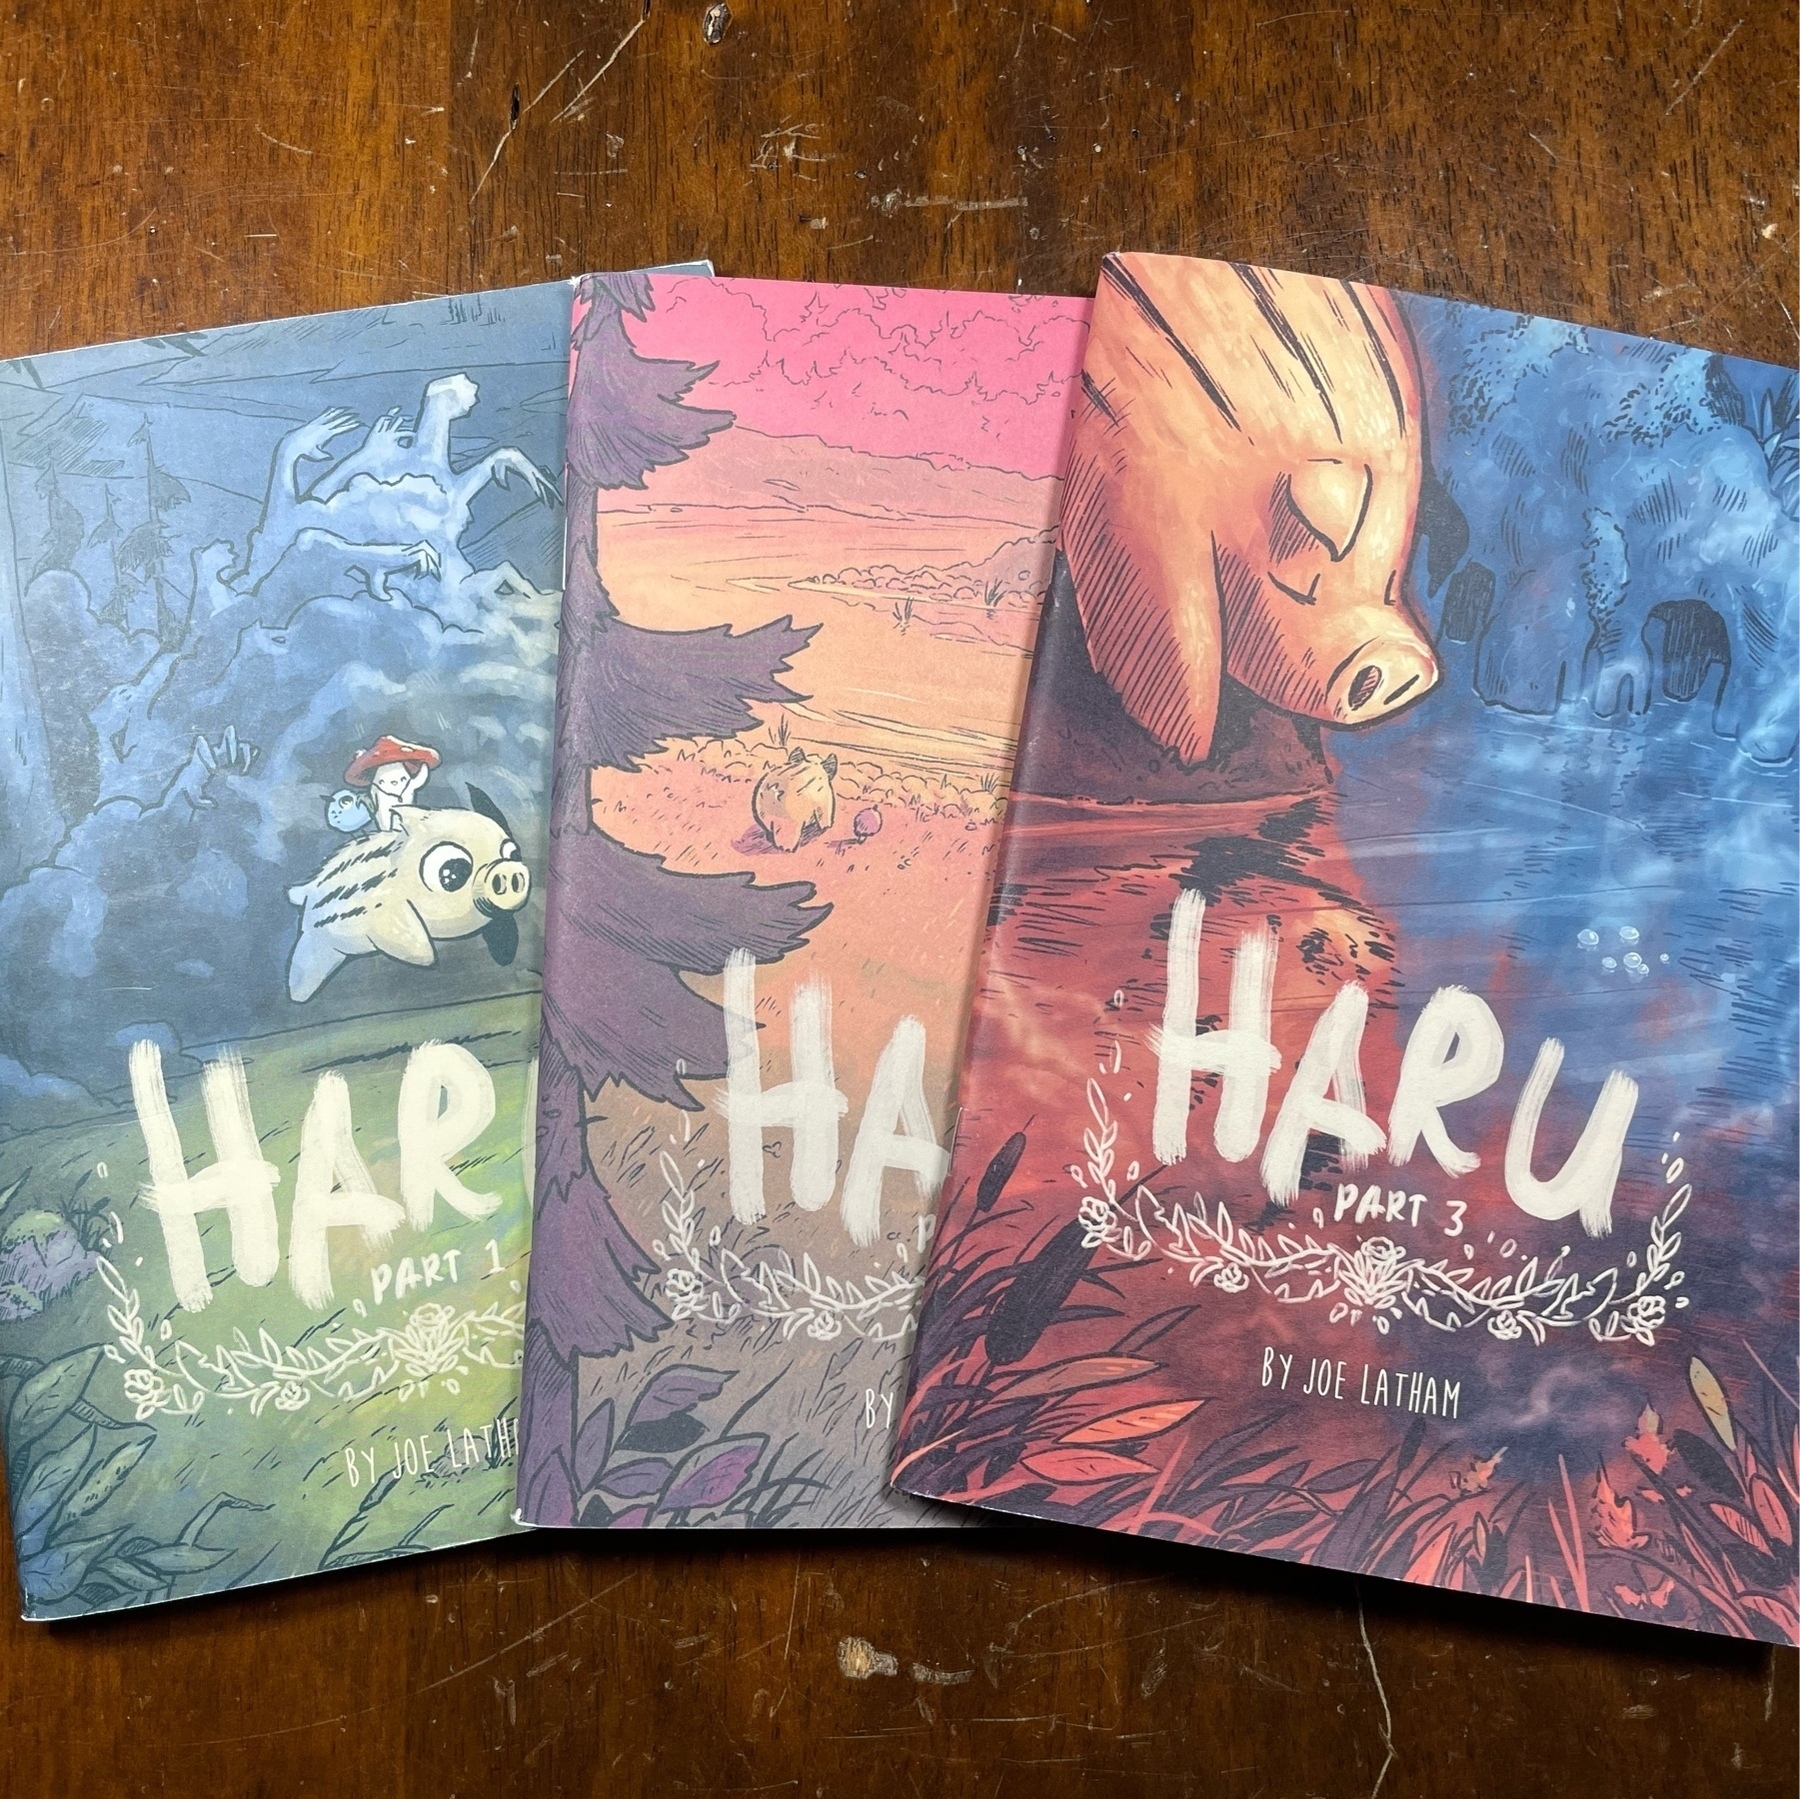 Issues 1–3 of Haru